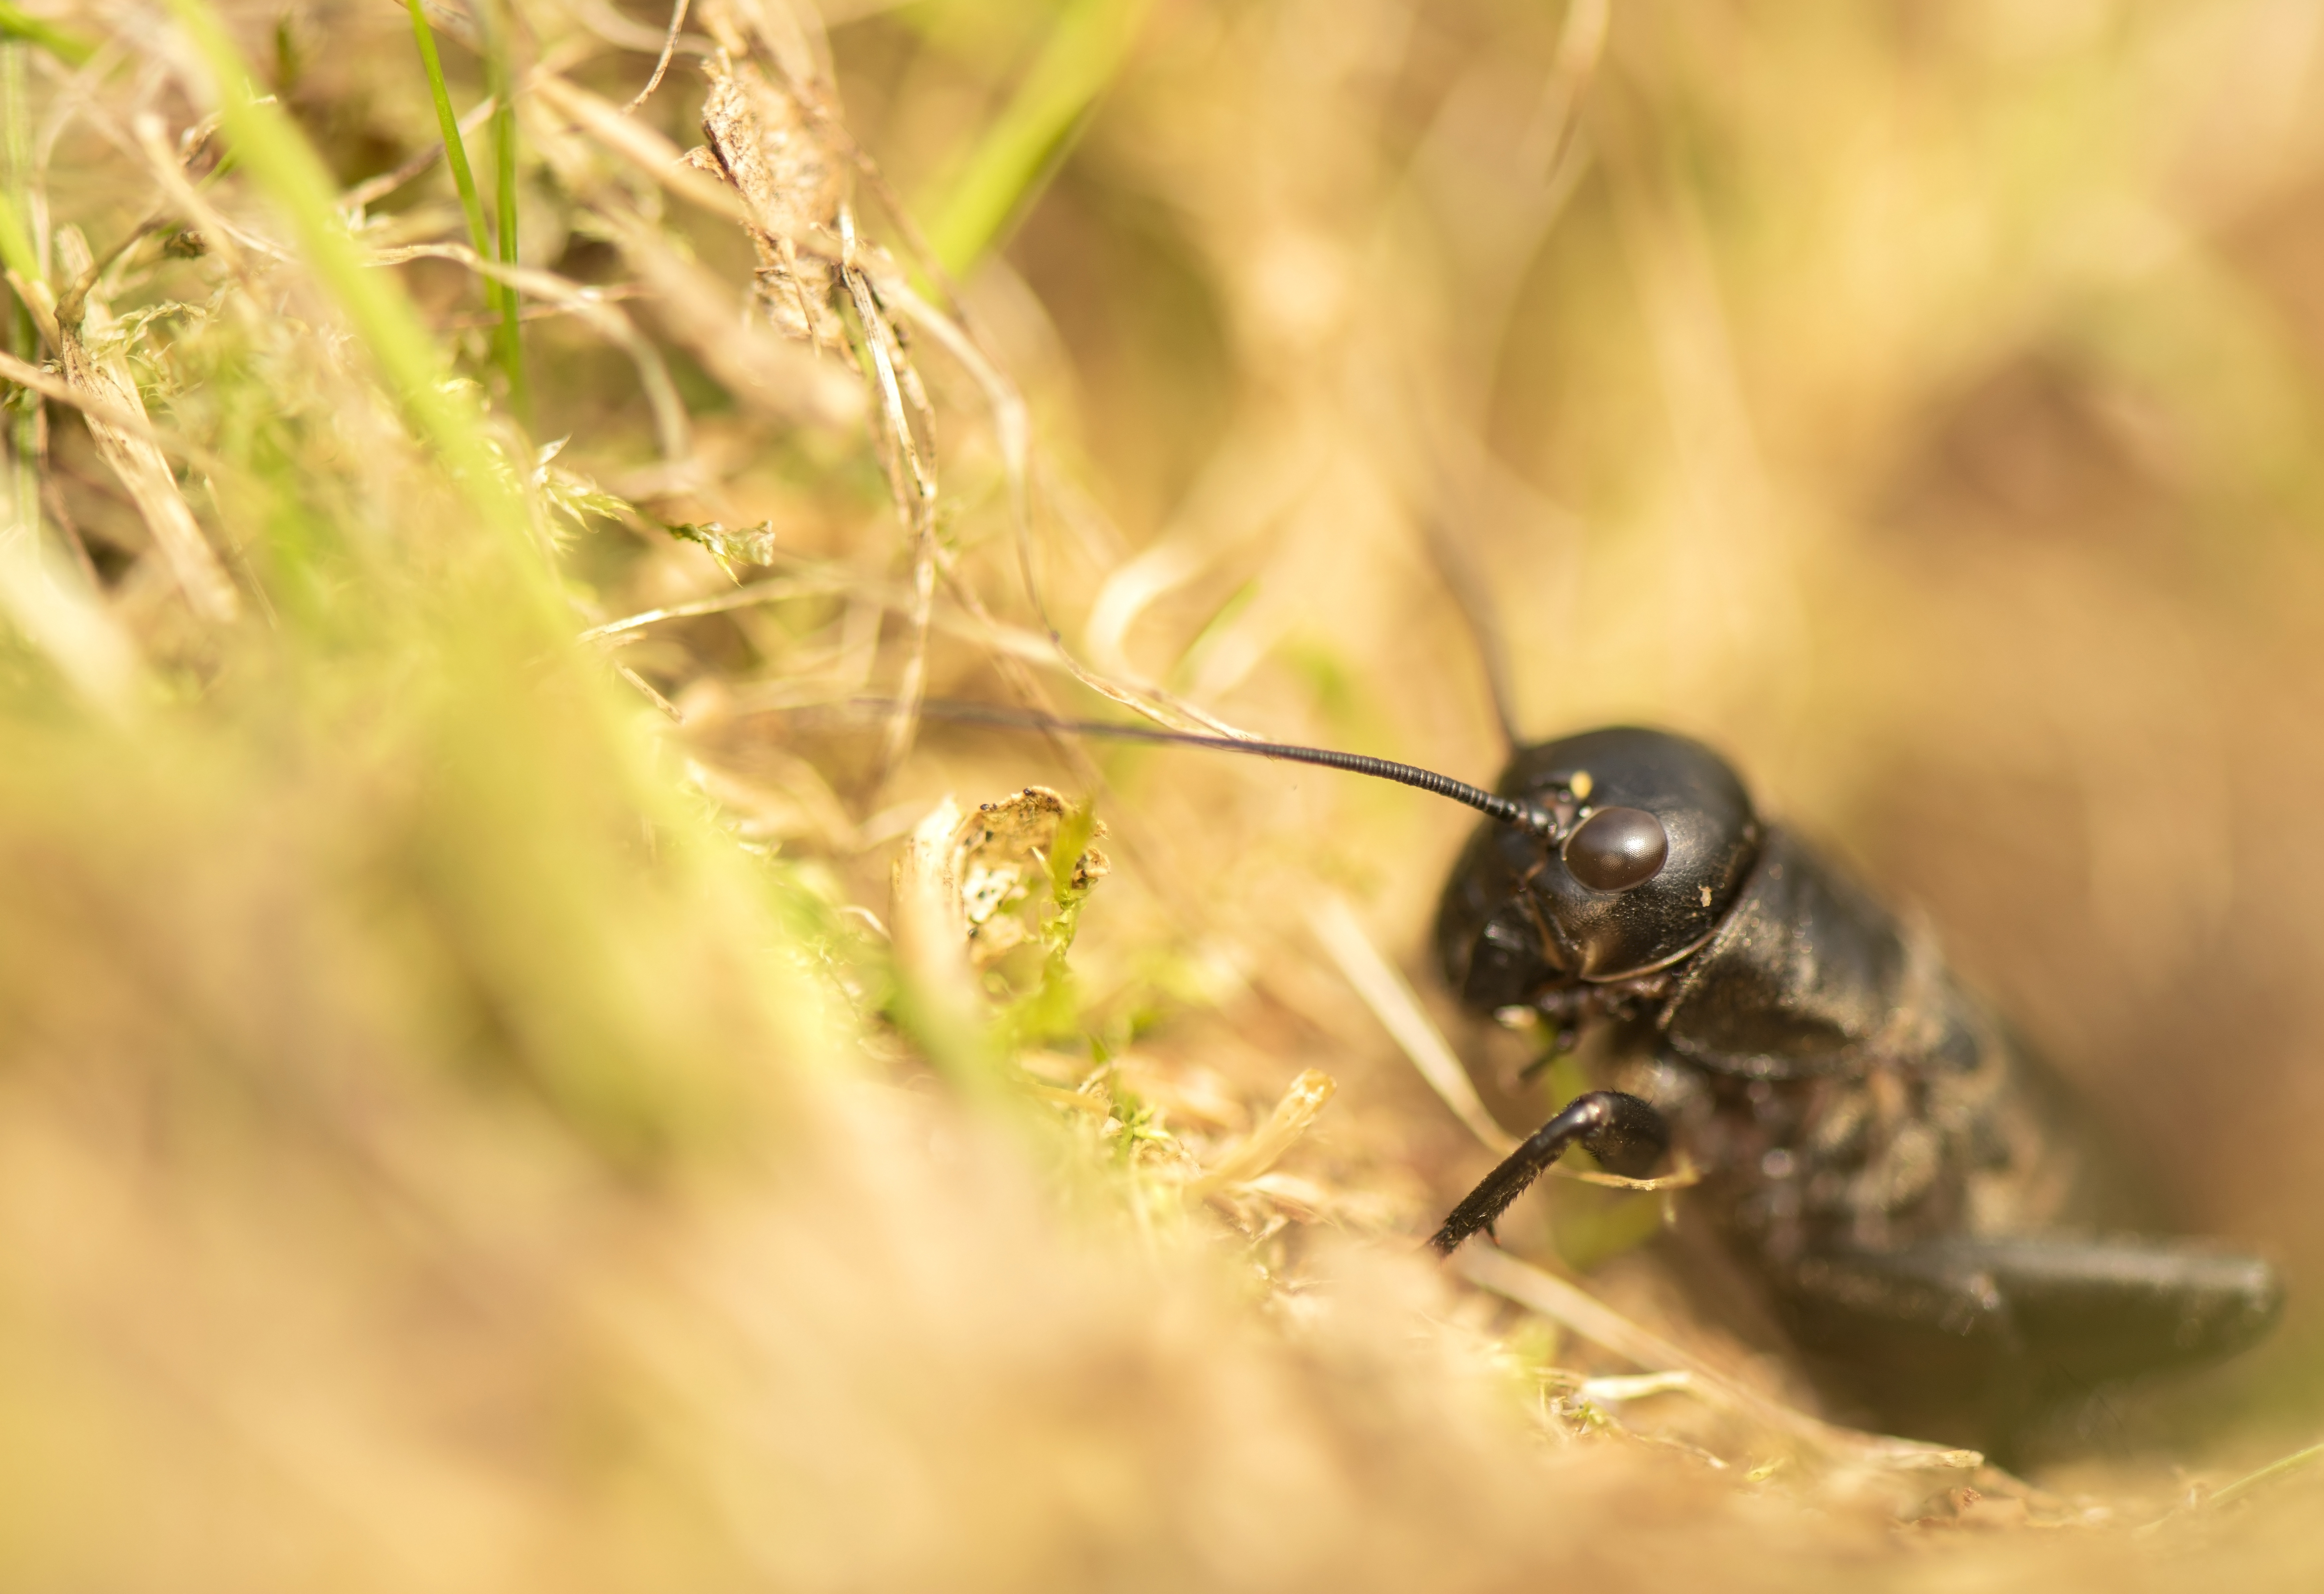 Field crickets were once the sound of summer but are now very rare (Ben Andrew/RSPB/PA)